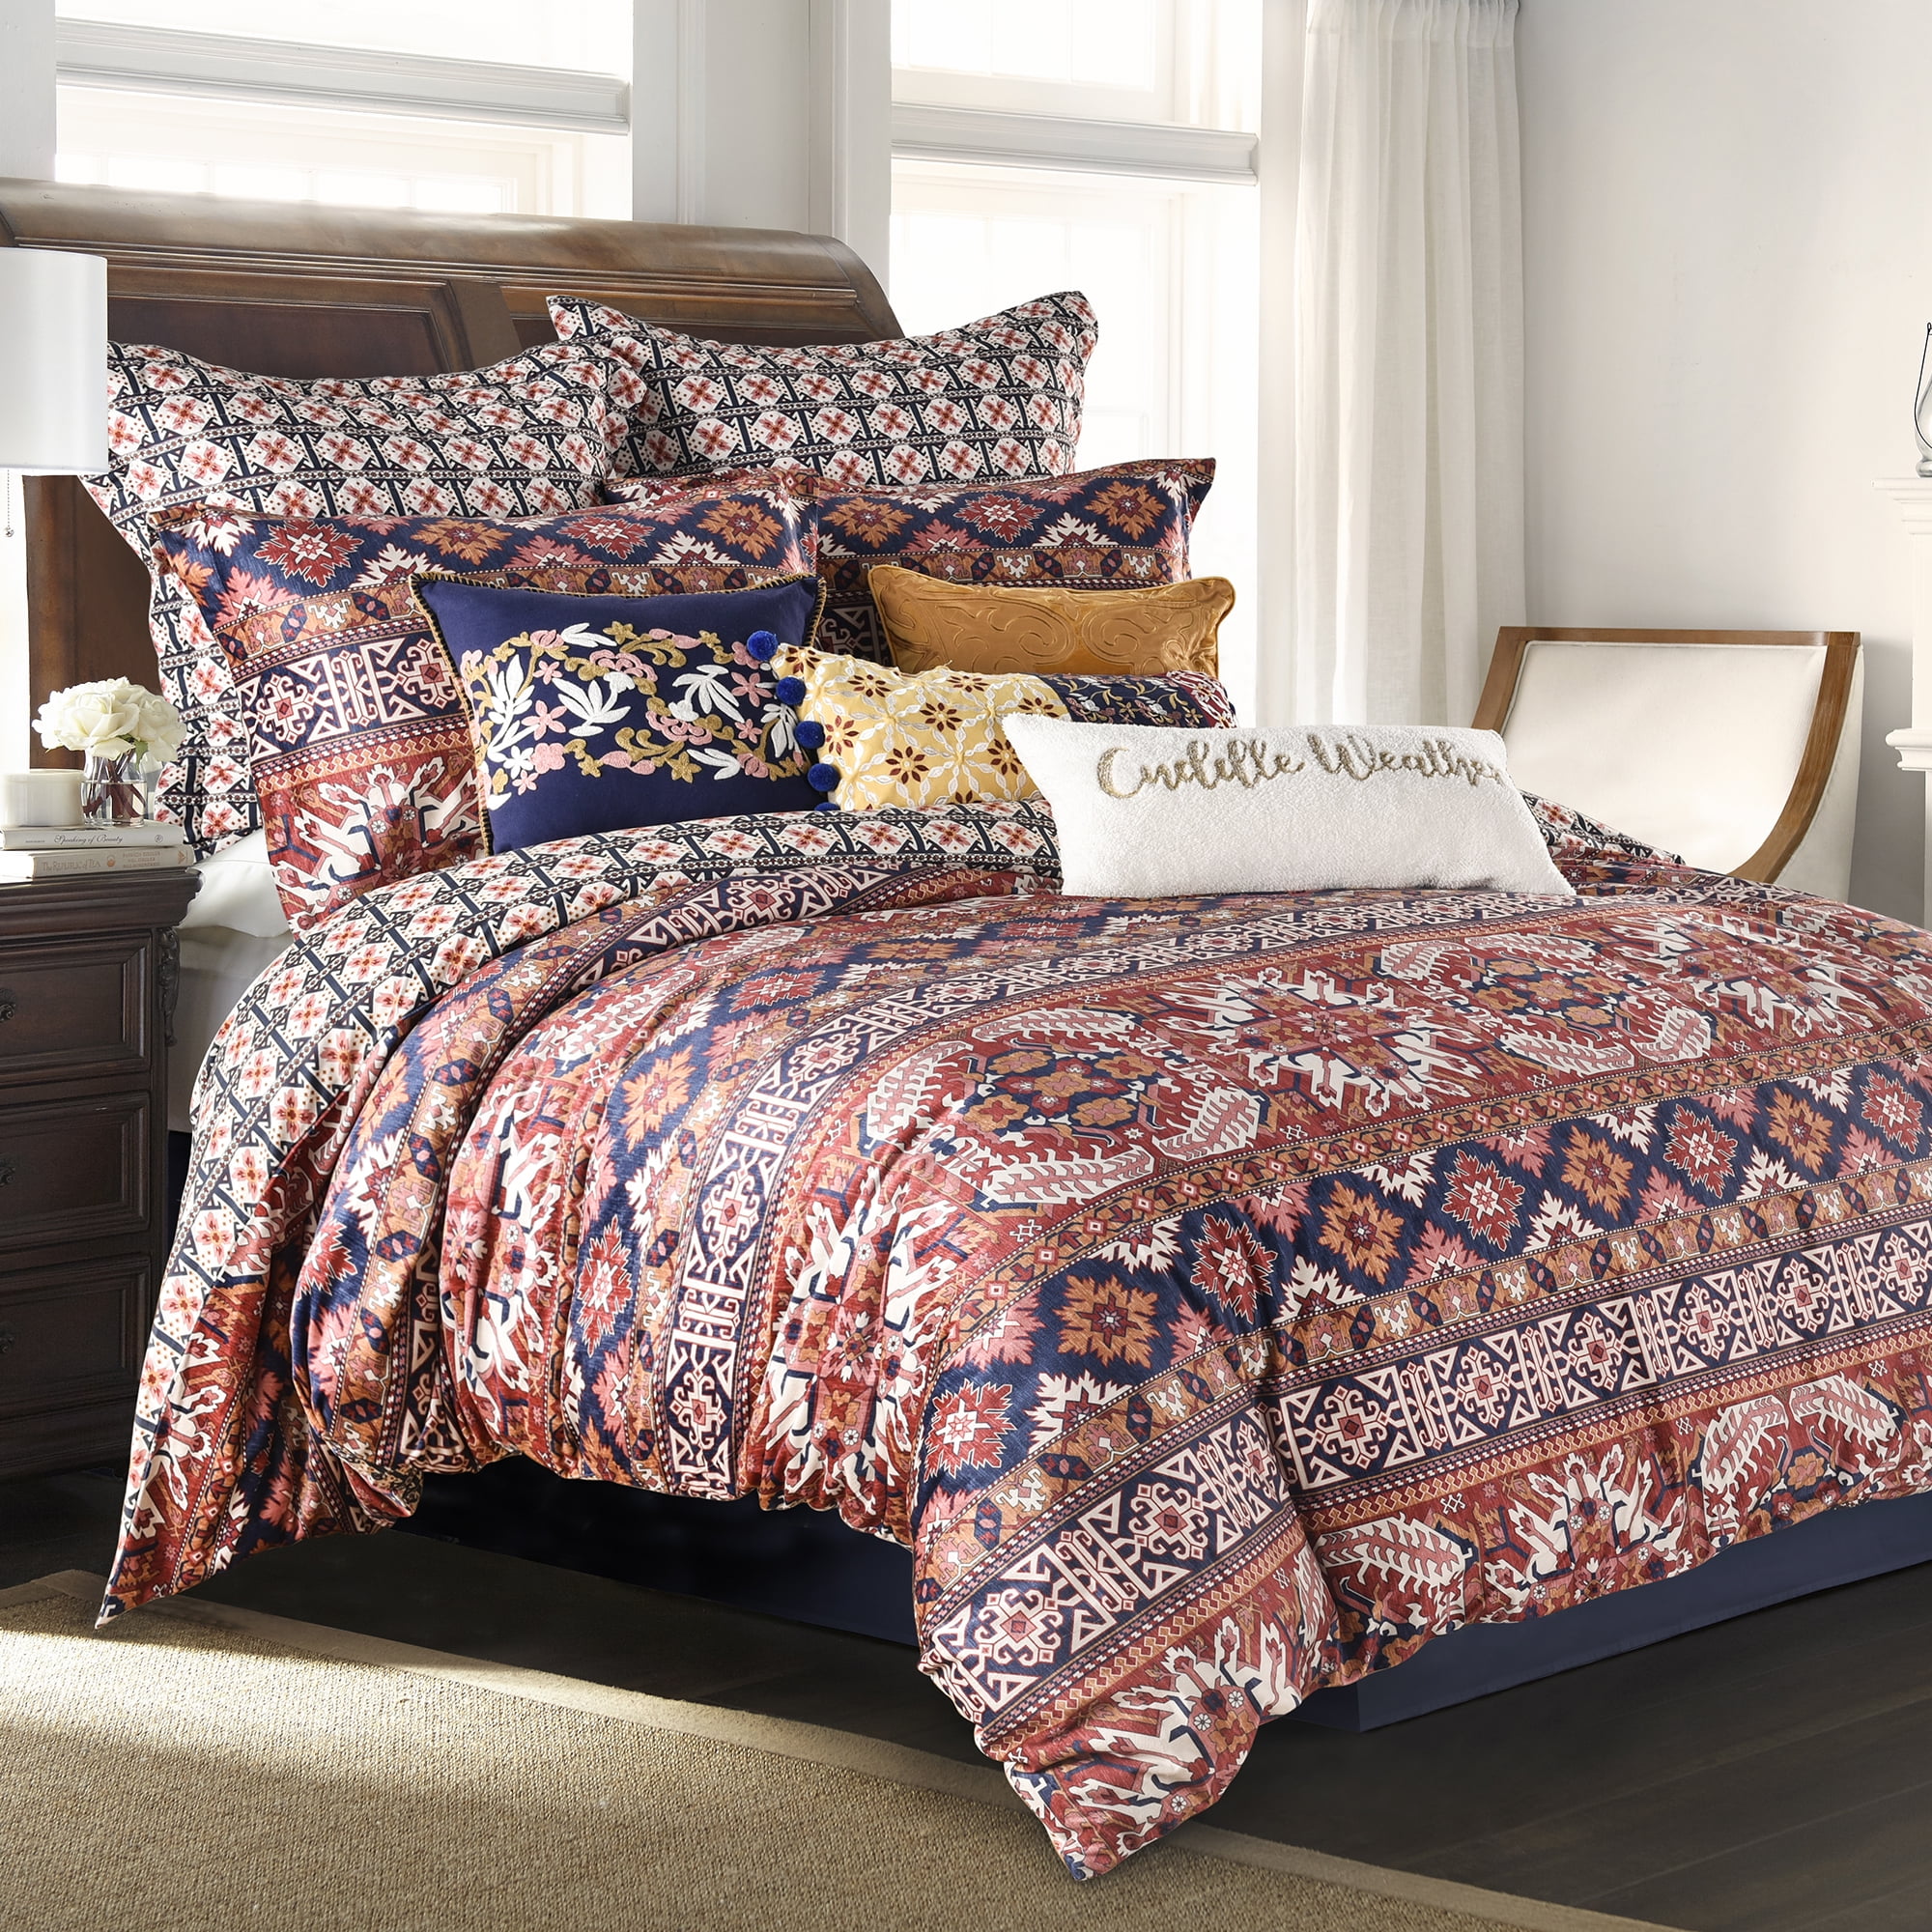 Full Queen Duvet Cover, What Is The Standard Size Of A Queen Duvet Cover